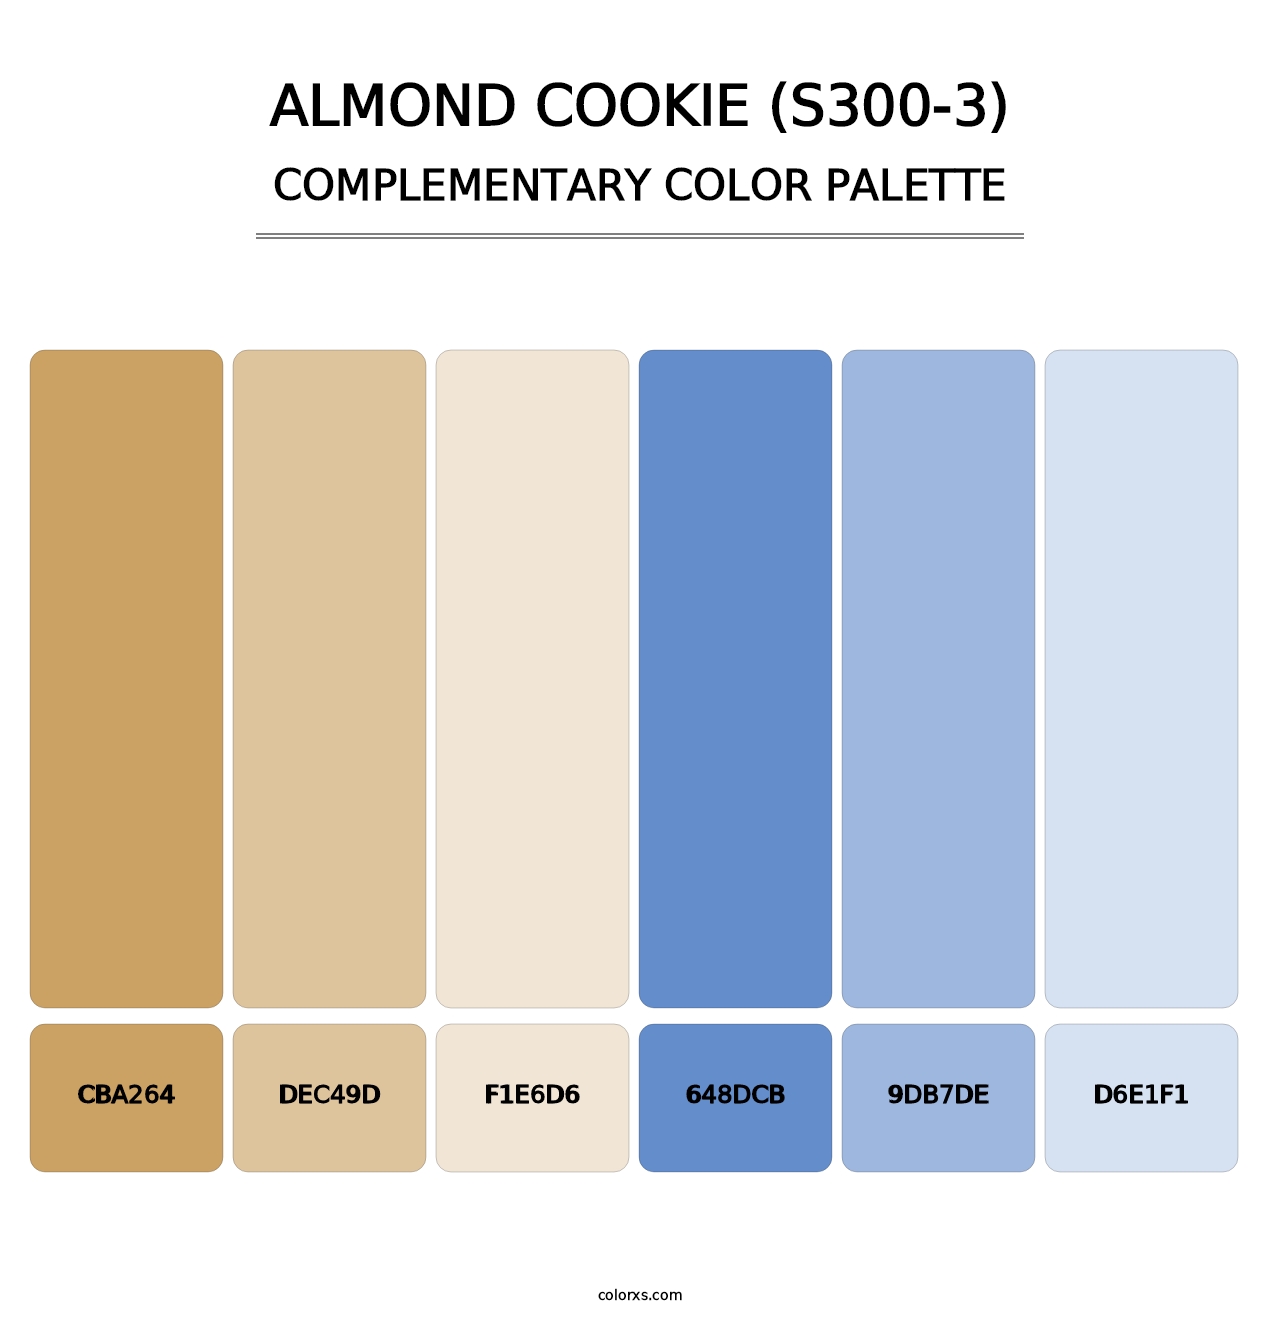 Almond Cookie (S300-3) - Complementary Color Palette